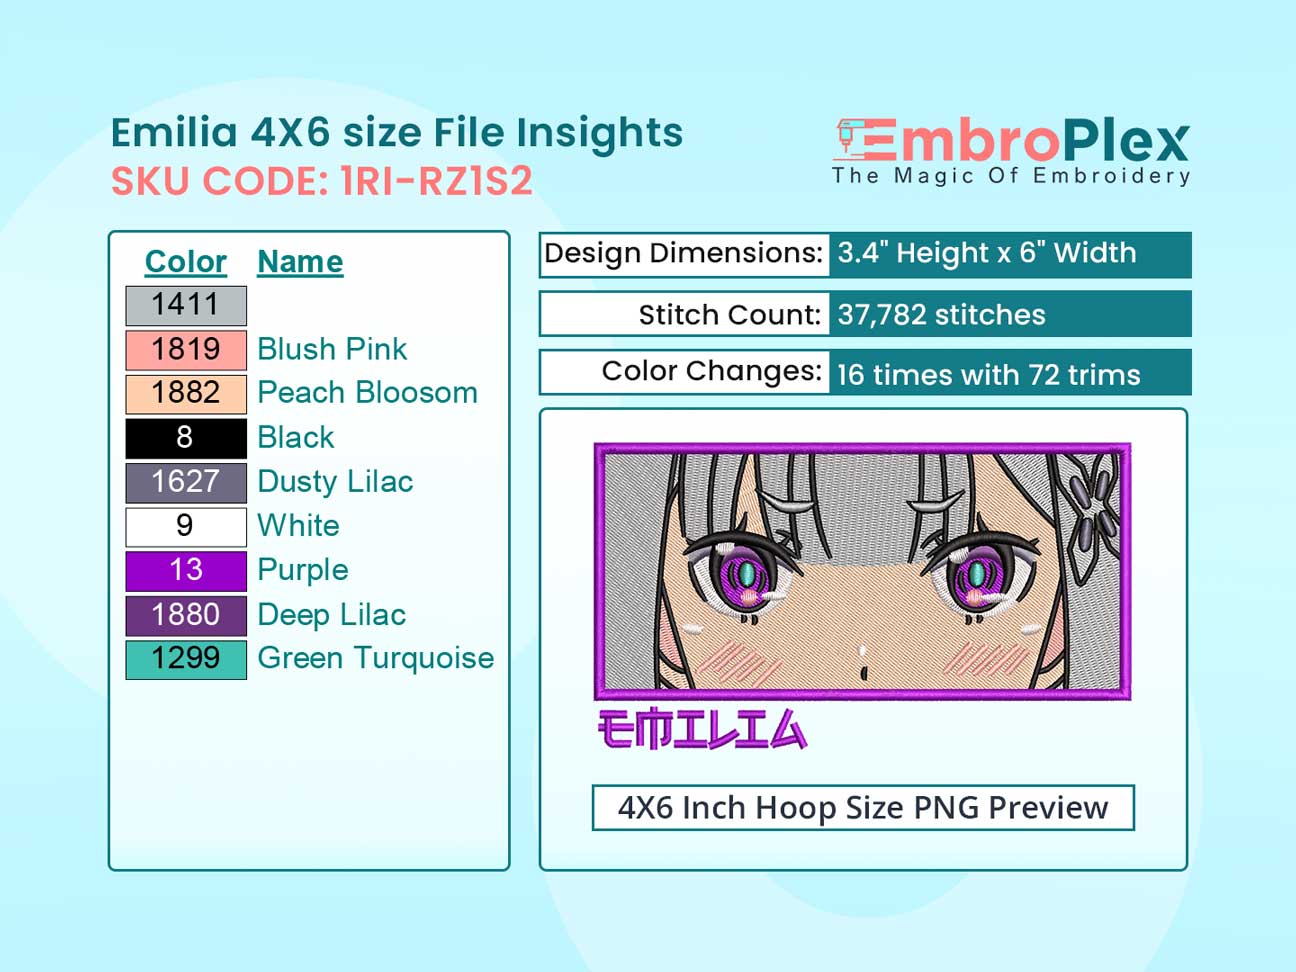 Anime-Inspired Emilia Embroidery Design File - 4x6 Inch hoop Size Variation overview image